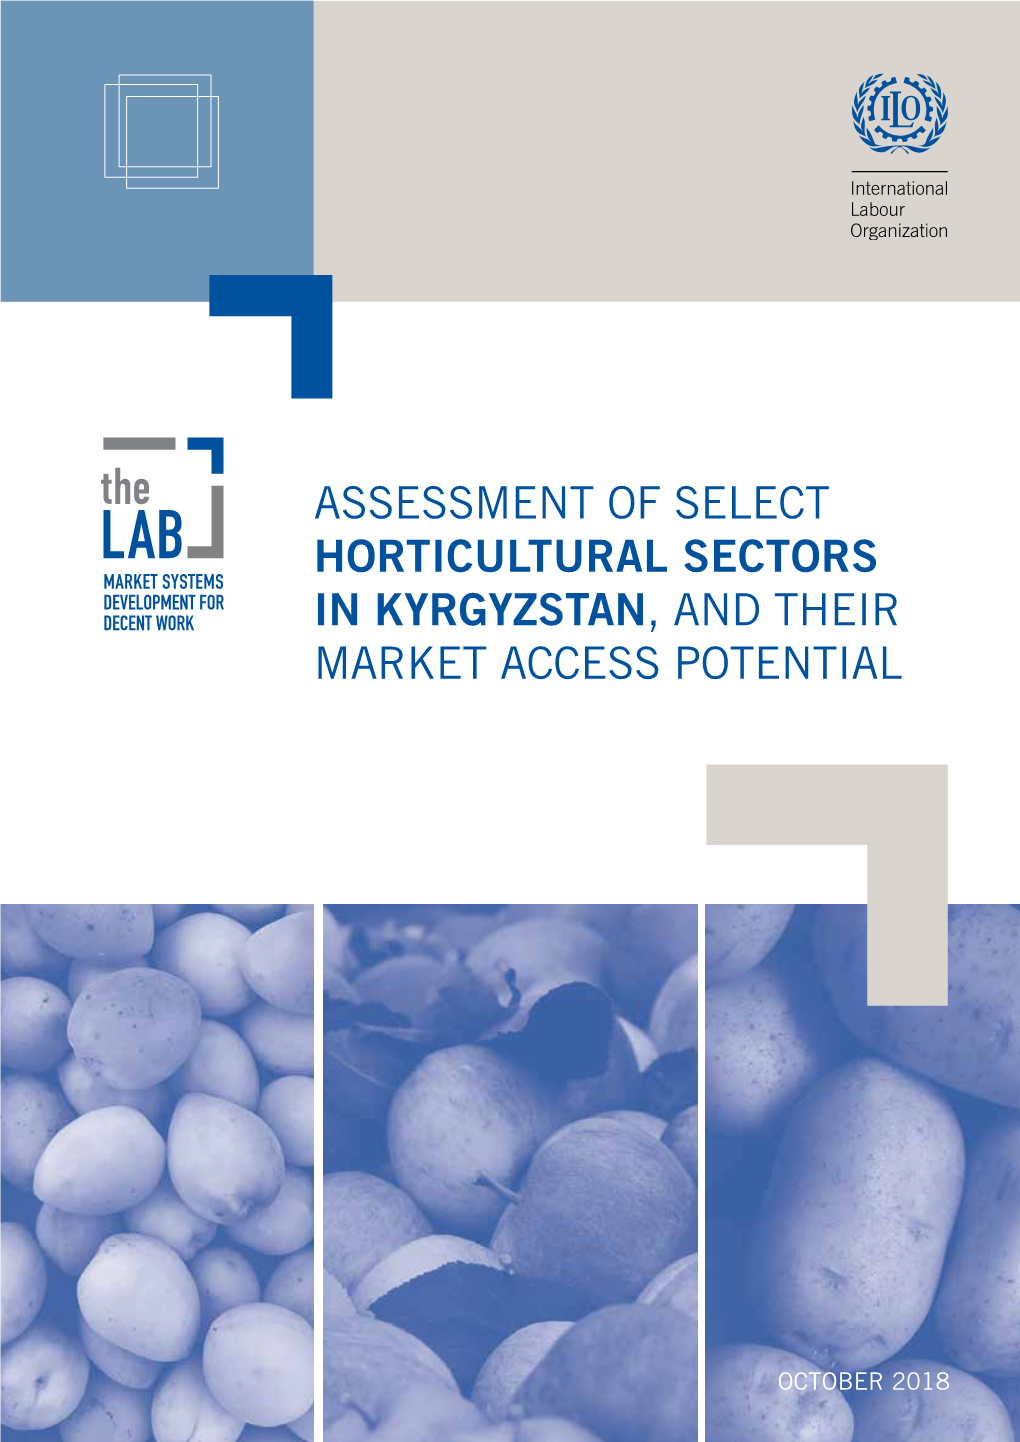 Assessment of Select Horticultural Sectors in Kyrgyzstan, and Their Market Access Potential